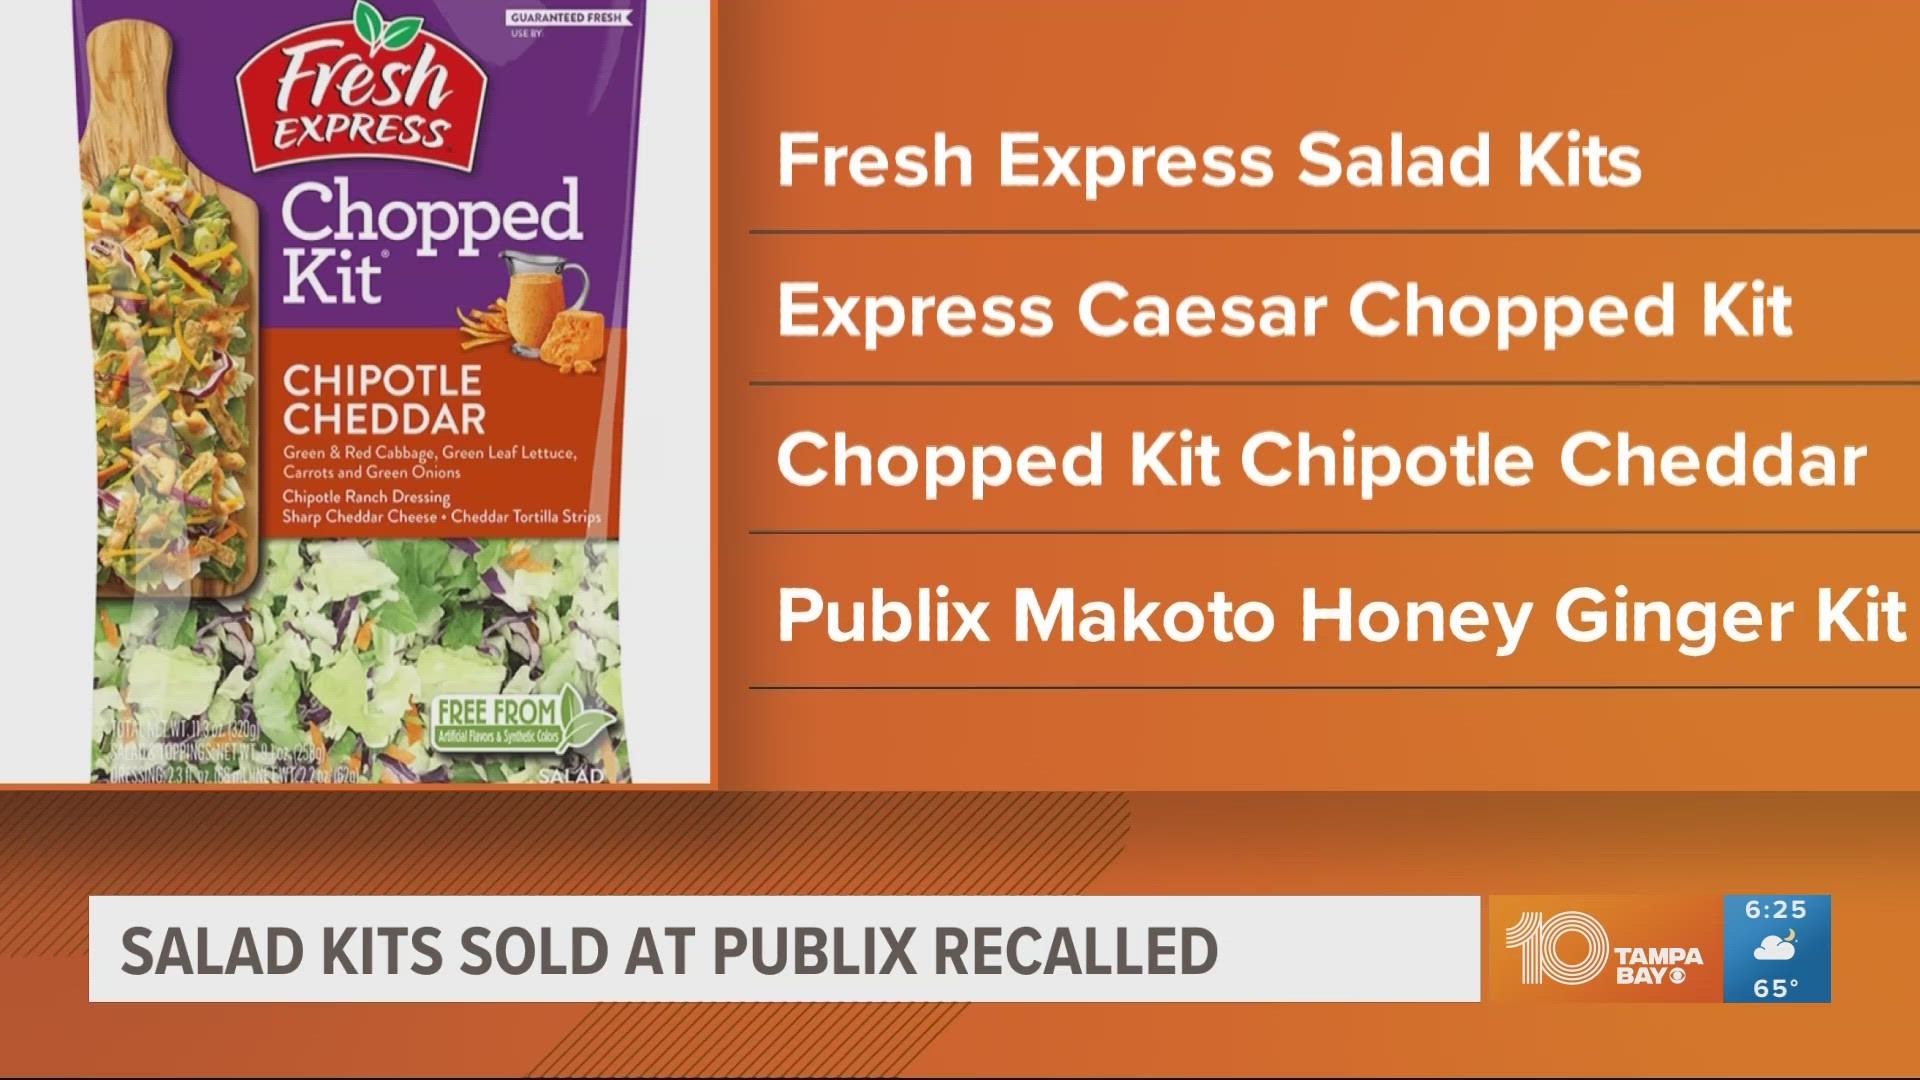 Meijer premade salad kits recalled over possible listeria contamination